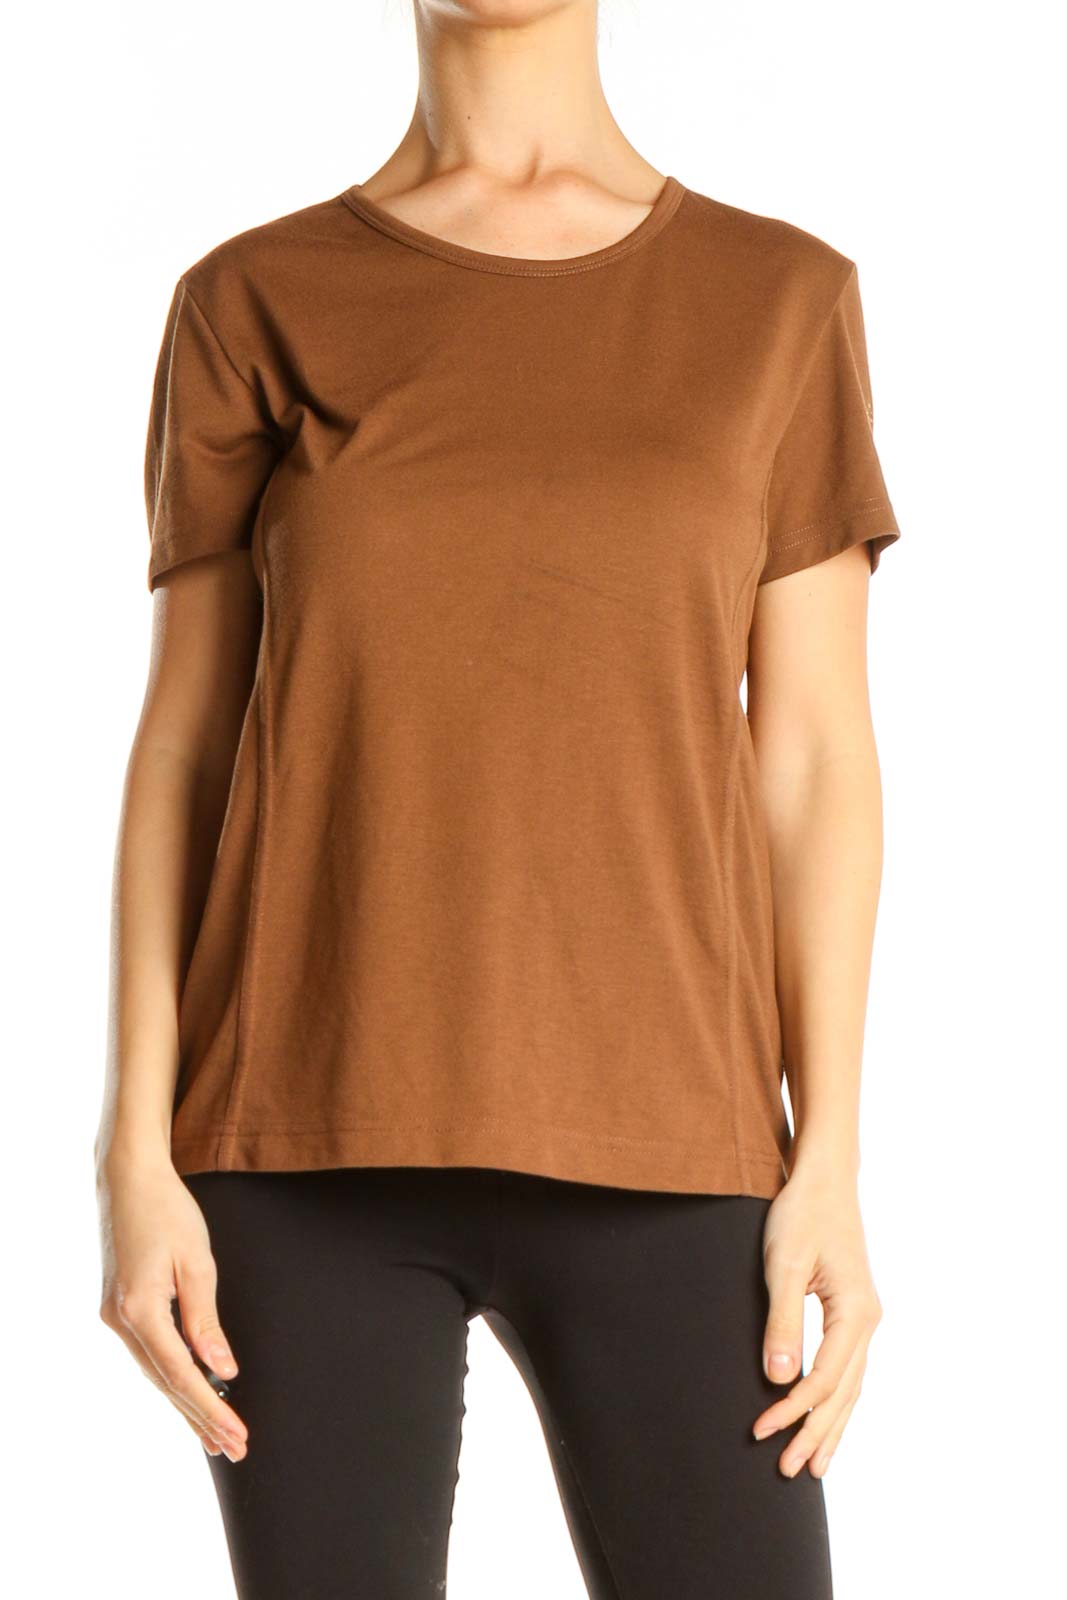 Brown All Day Wear T-Shirt Front